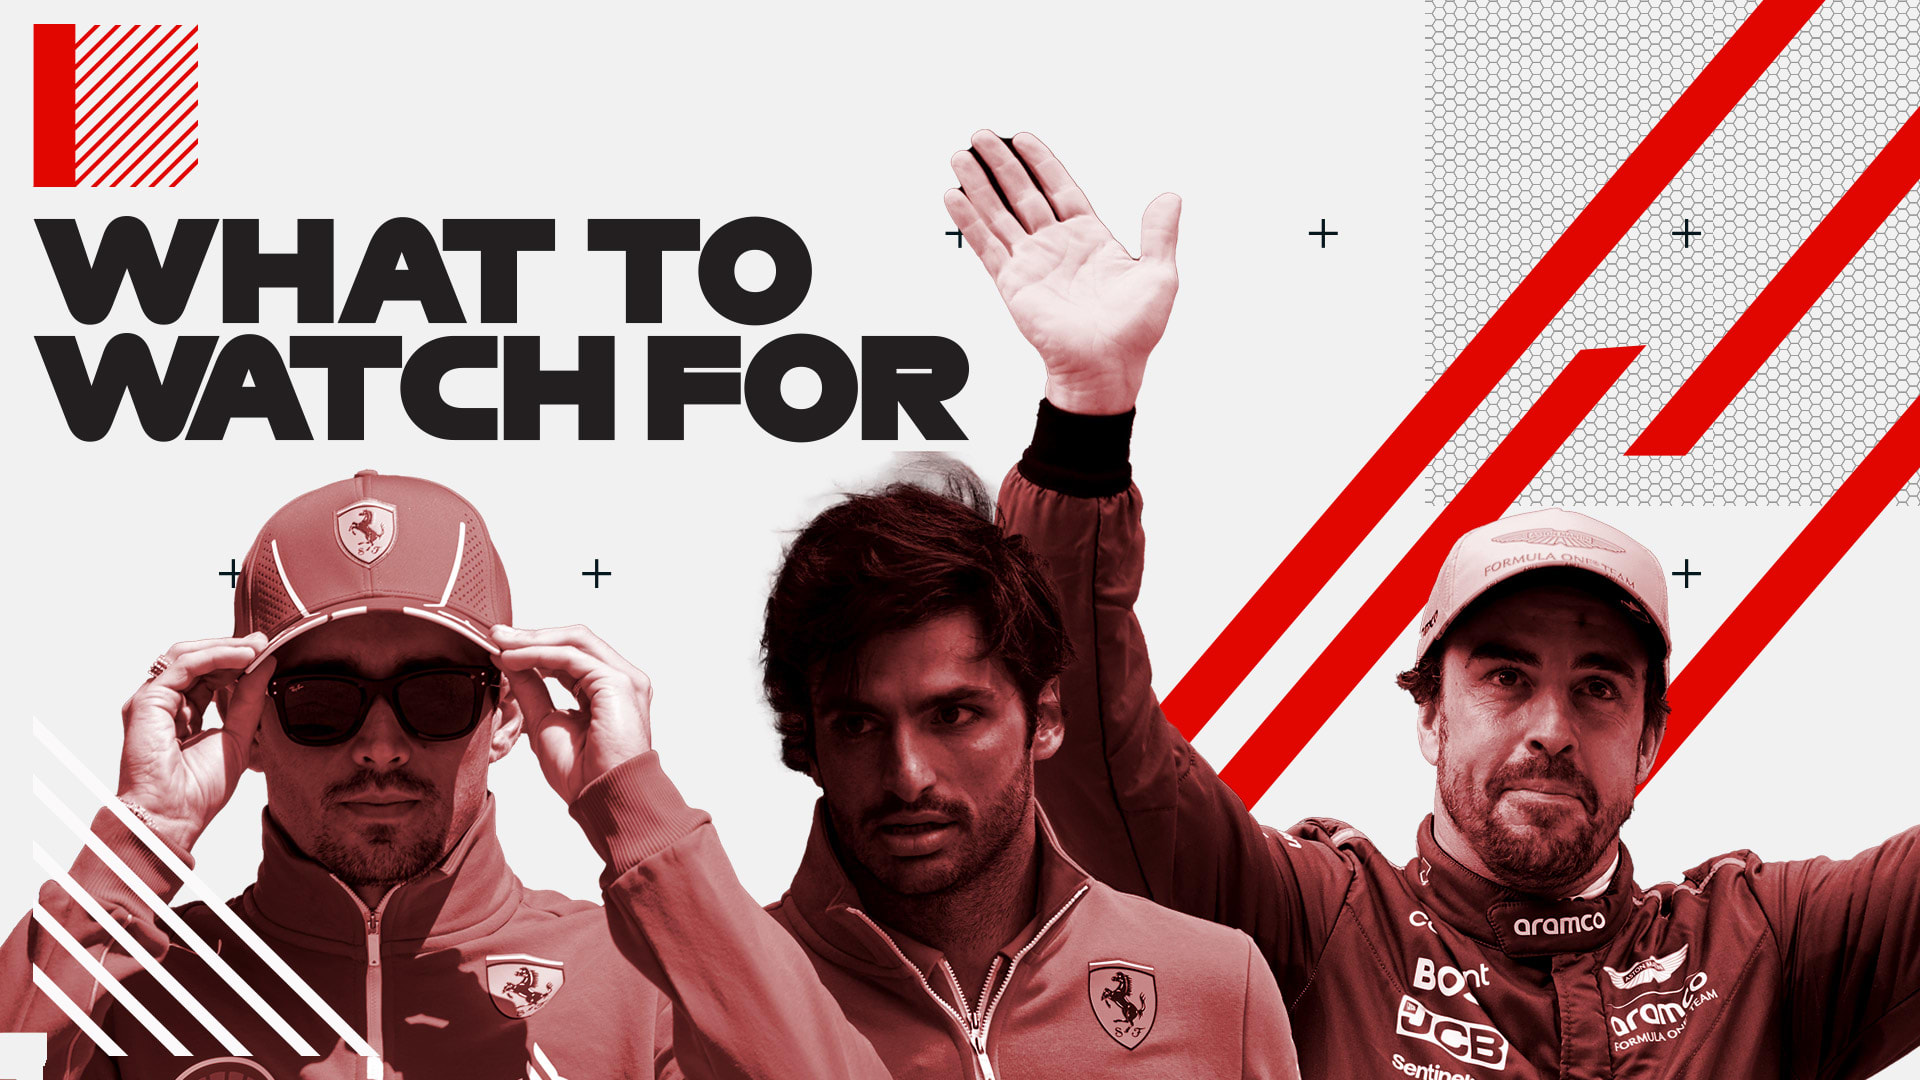 Ferrari vs Ferrari and Alonso gunning for the podium – What To Watch For in the Chinese Grand Prix